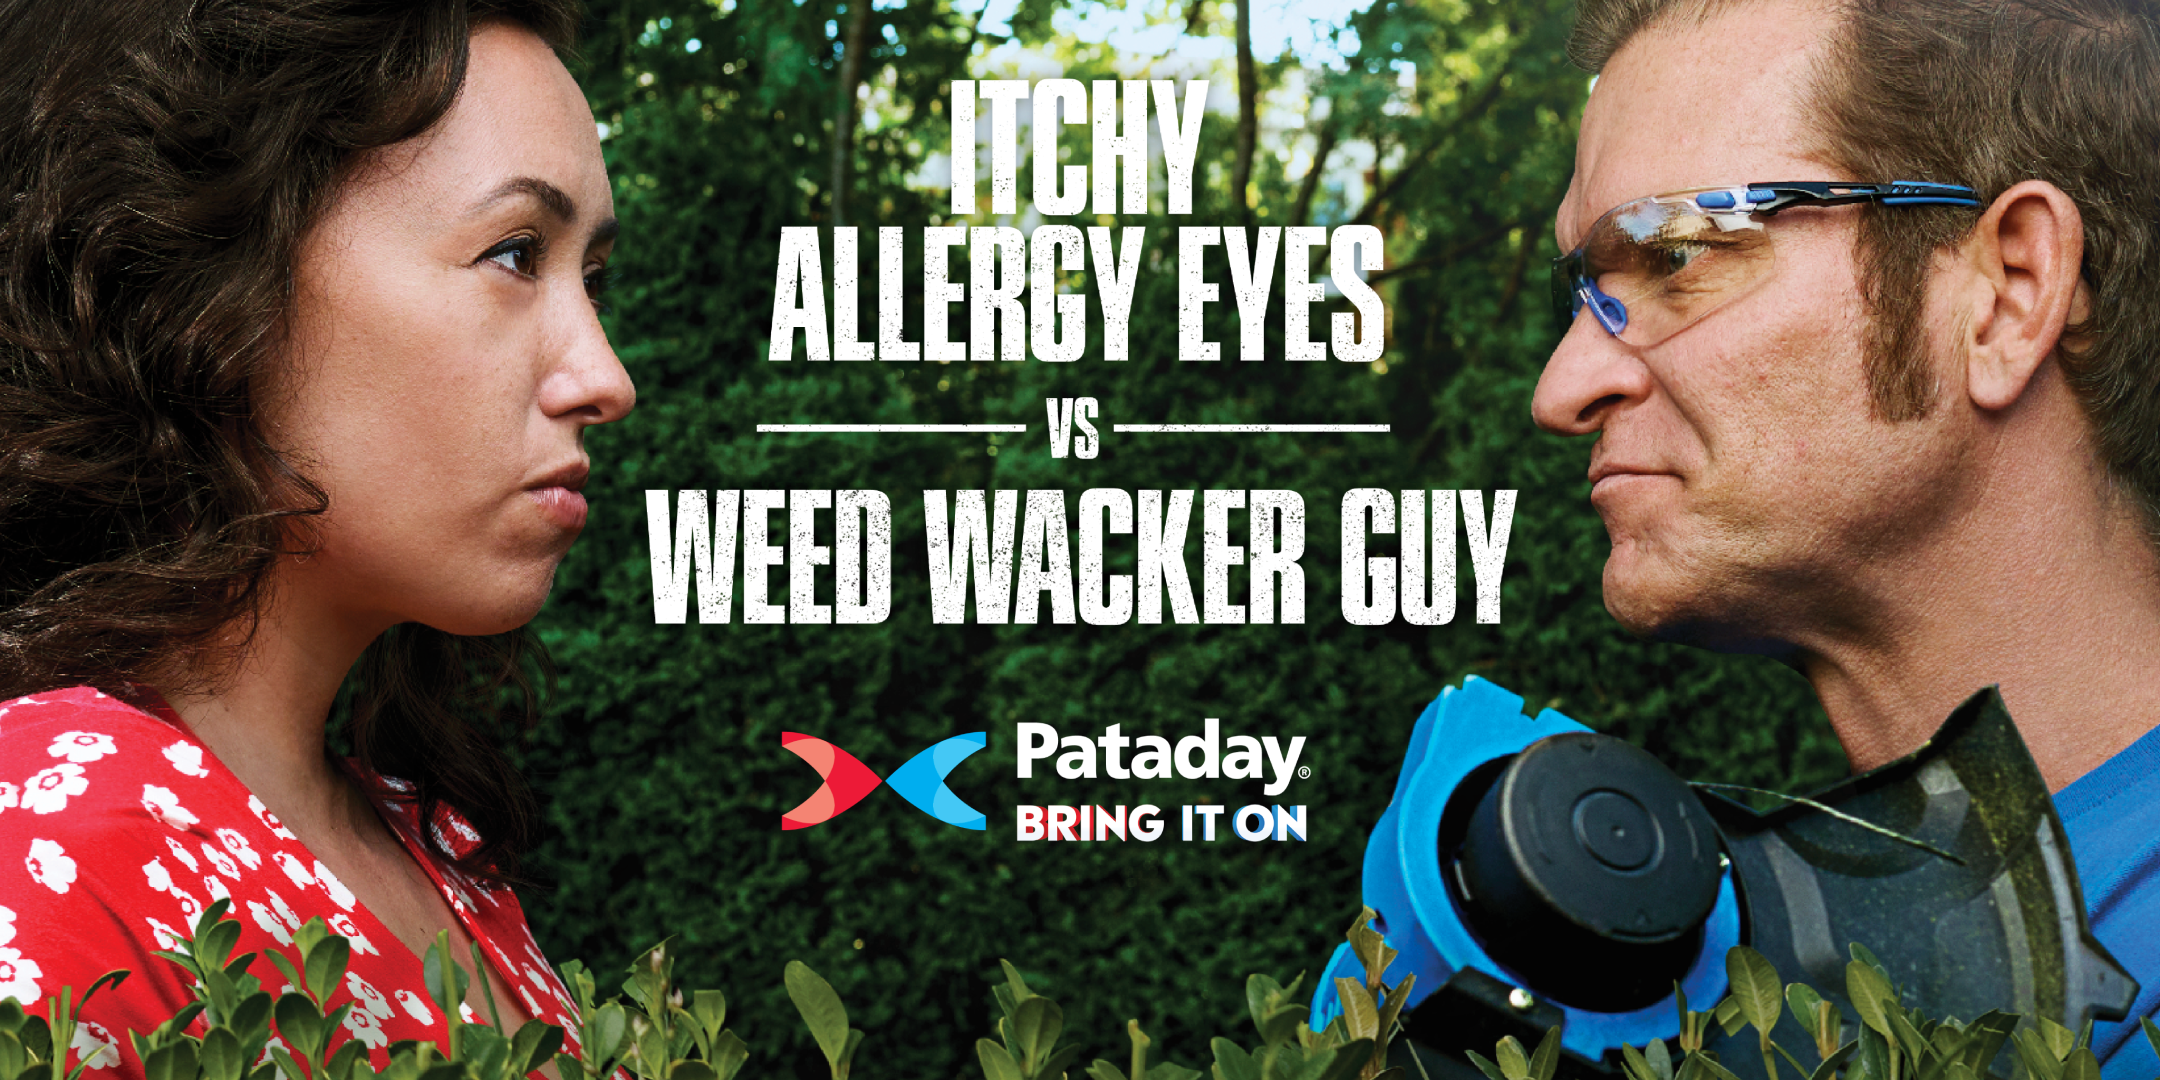 Woman wearing a red floral print dress staring intensely into the eyes of a man holding a weed wacker with text reading “itchy allergy eyes vs weed wacker guy - Pataday bring it on” 